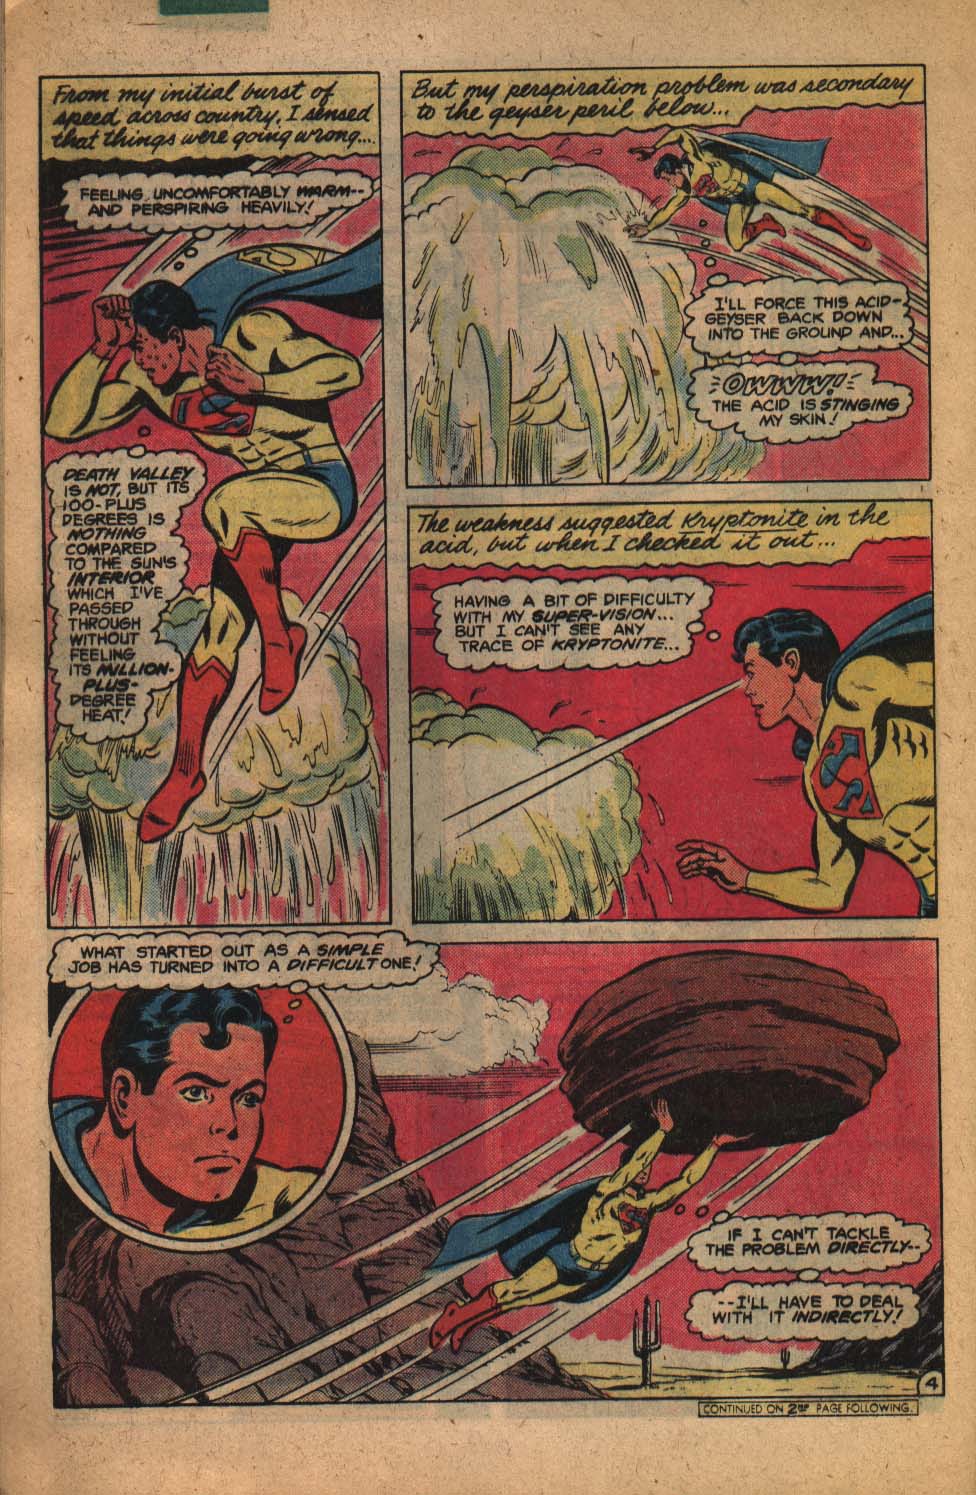 The New Adventures of Superboy 18 Page 27